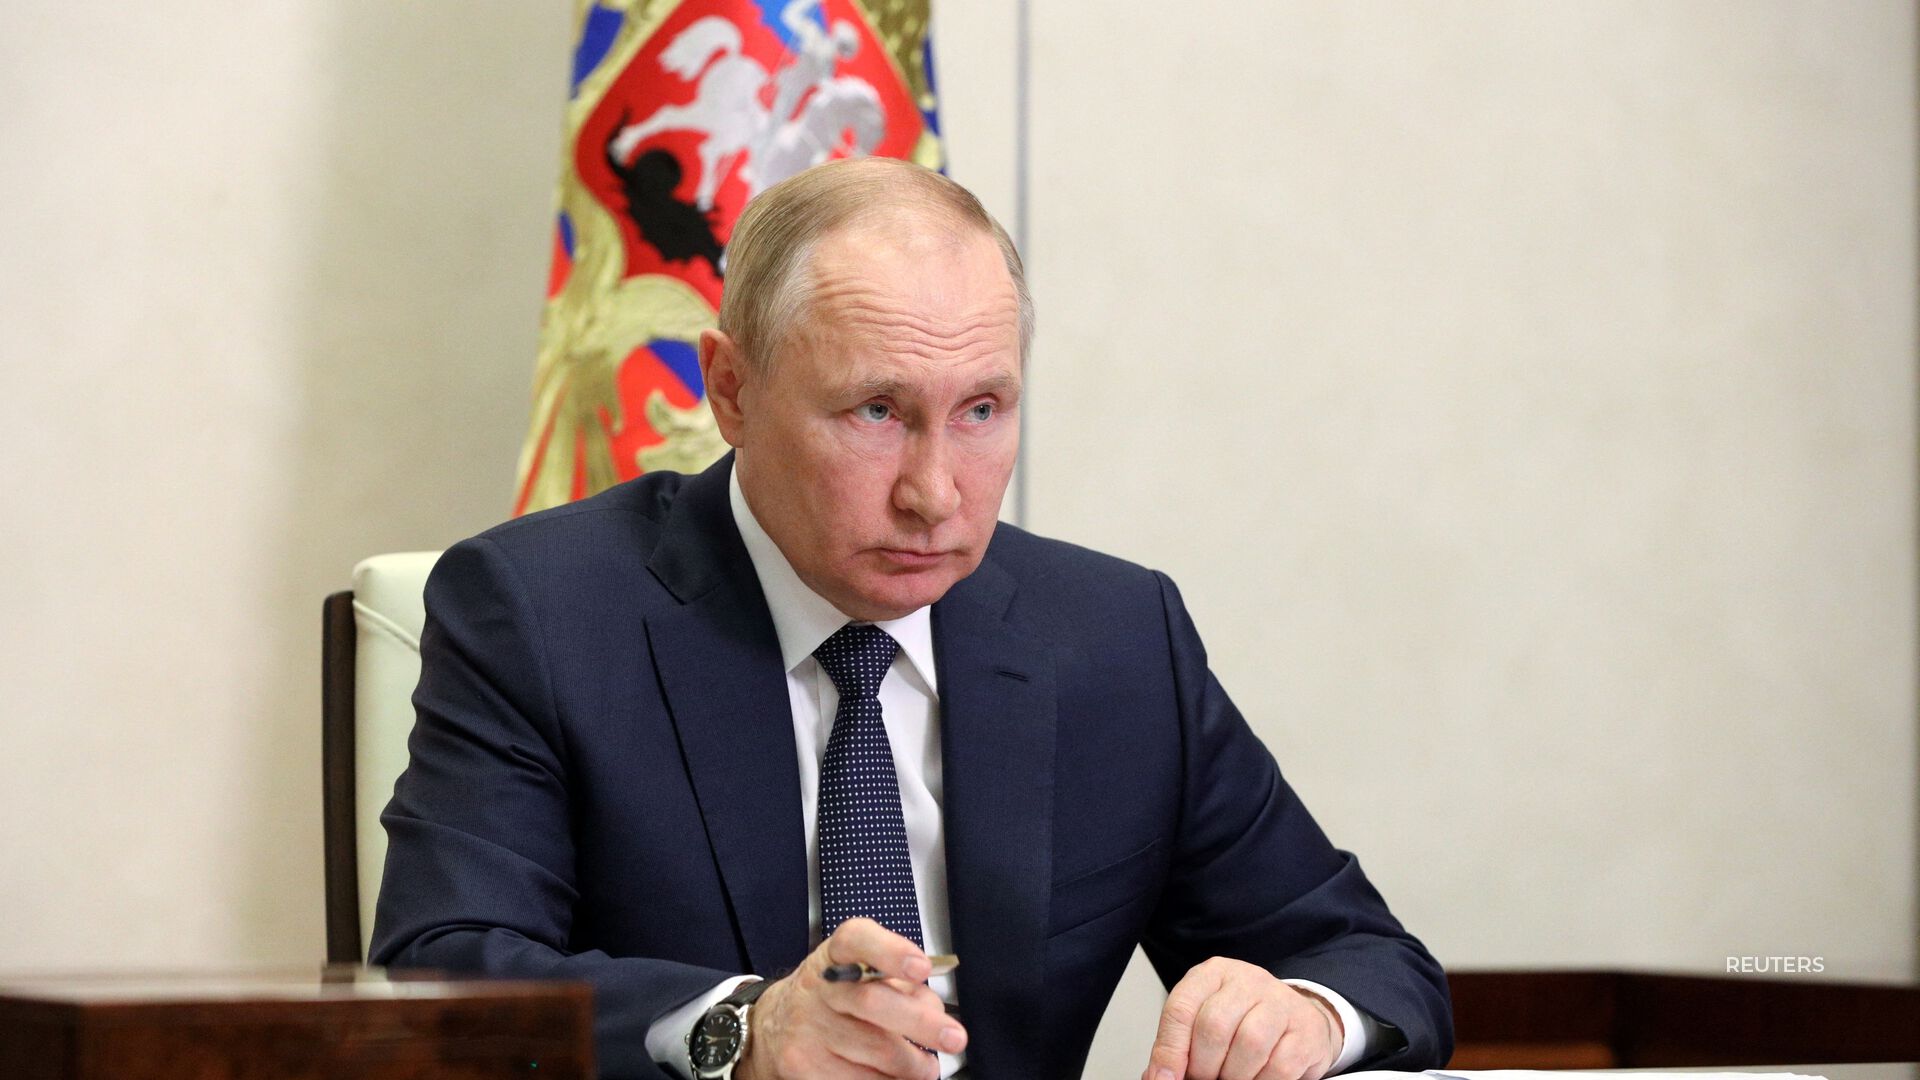 Putin is scheduled to visit Iran on Tuesday, China responds to the potential of Nancy Pelosi visiting Taiwan, the House to vote on same-sex marriage bill.